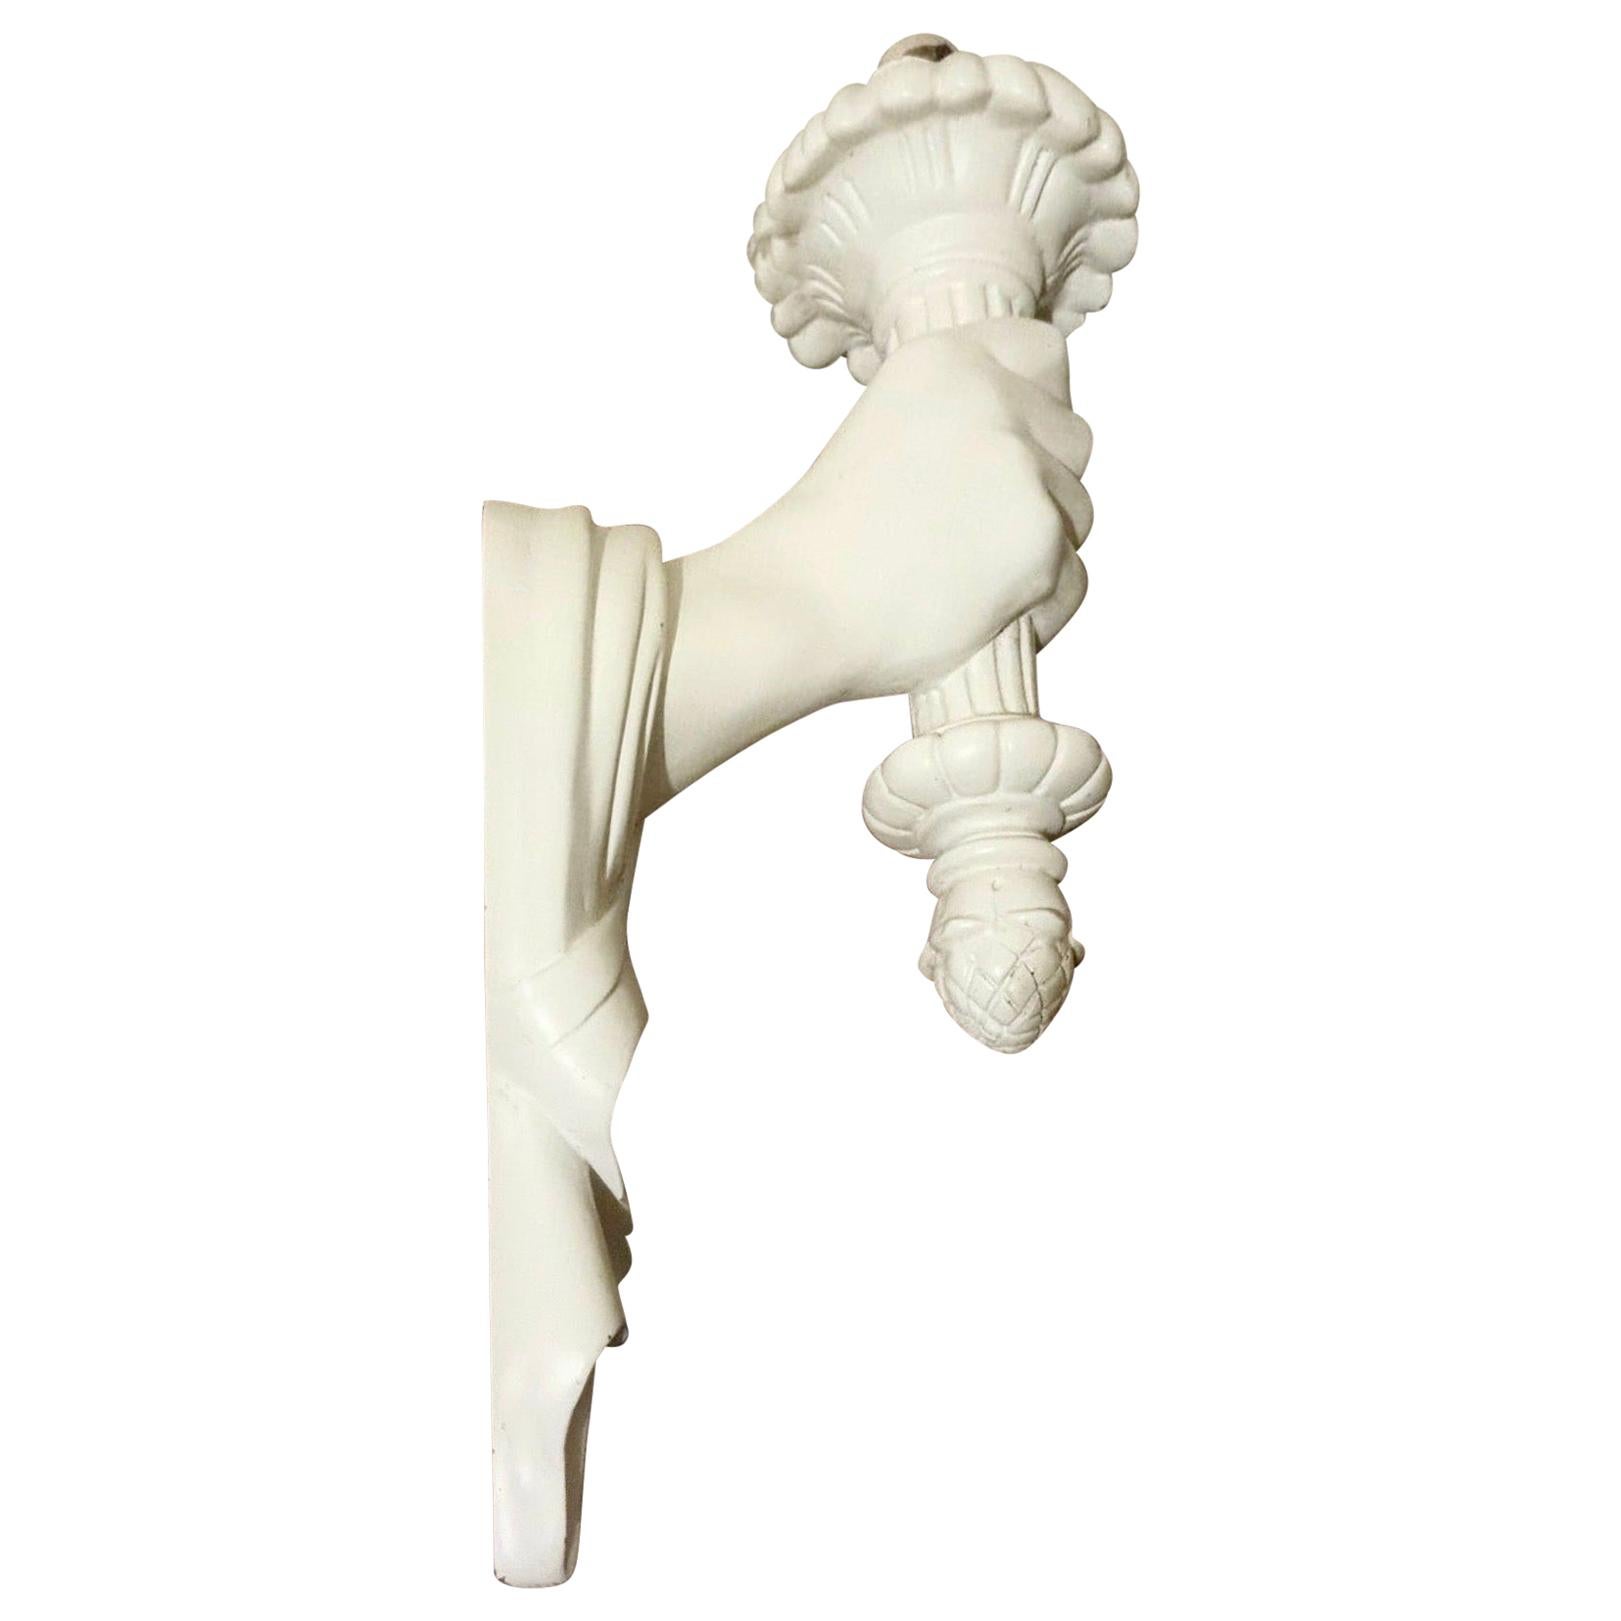 Sirmos Plaster Hand & Torch Sconce, Midcentury Figural Fixture, 1970s, Labelled